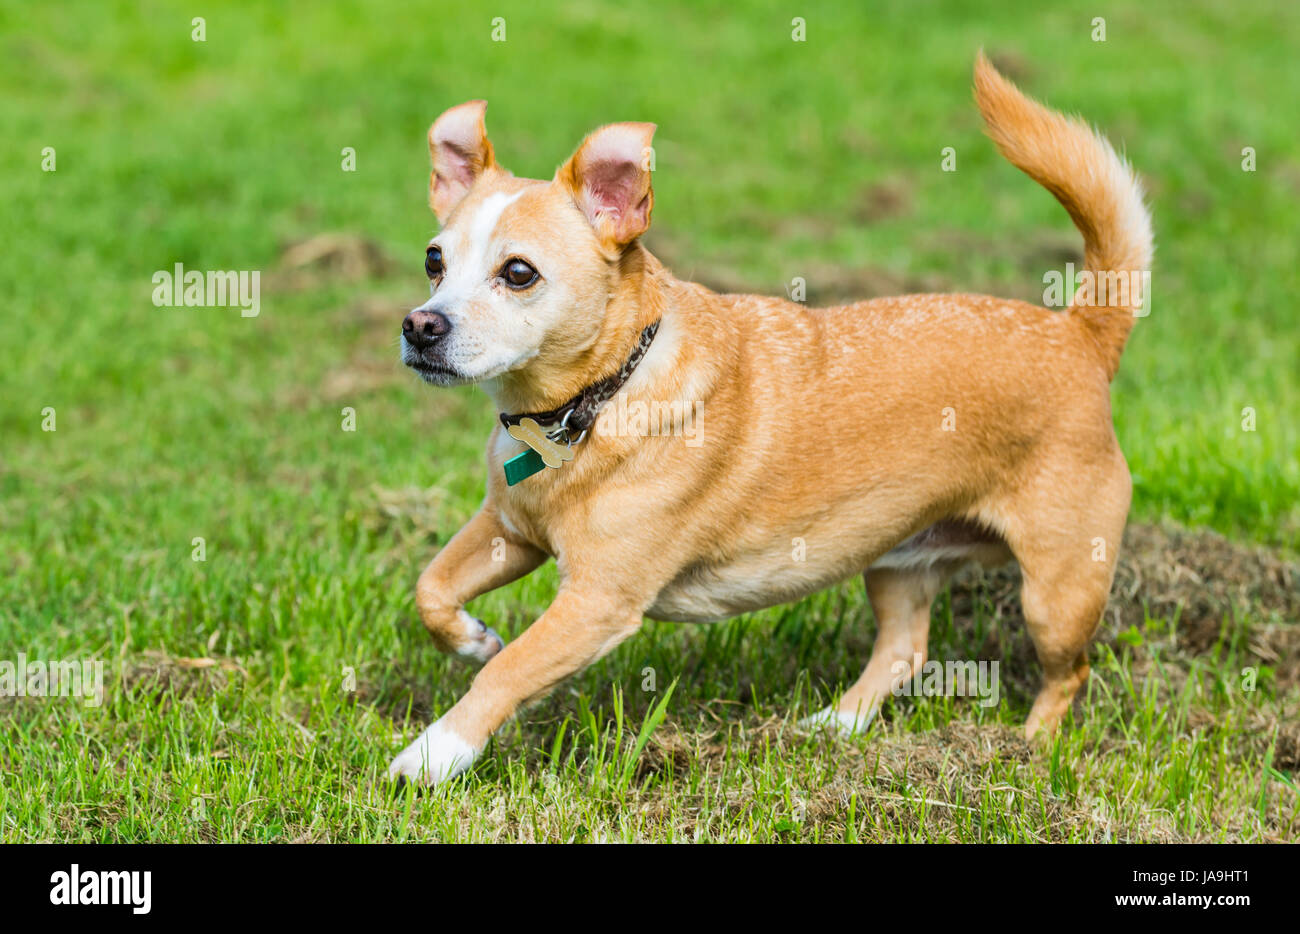 Small dog running on grass. It is a cross of a Chihuahua and Jack Russell Terrier. Stock Photo